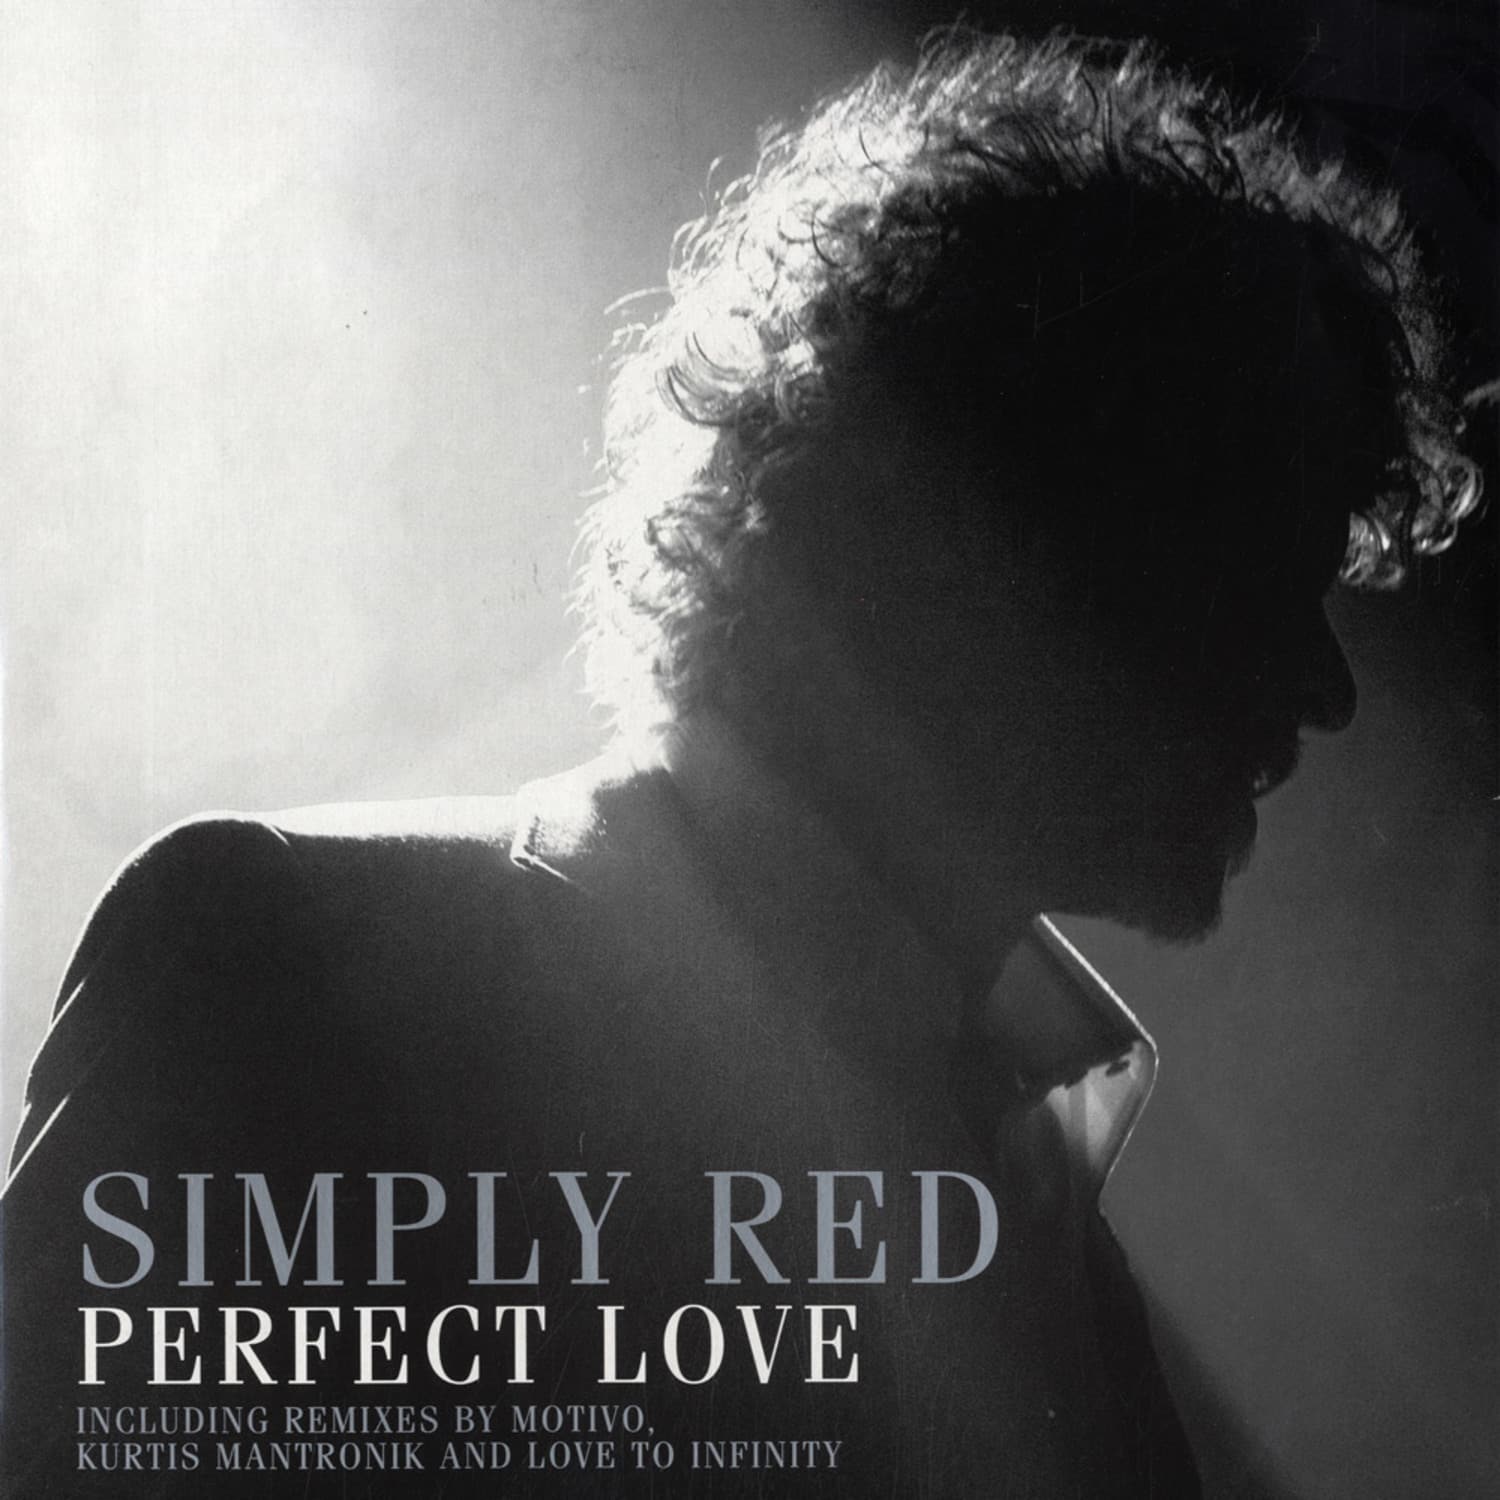 Simply Red - PERFECT LOVE